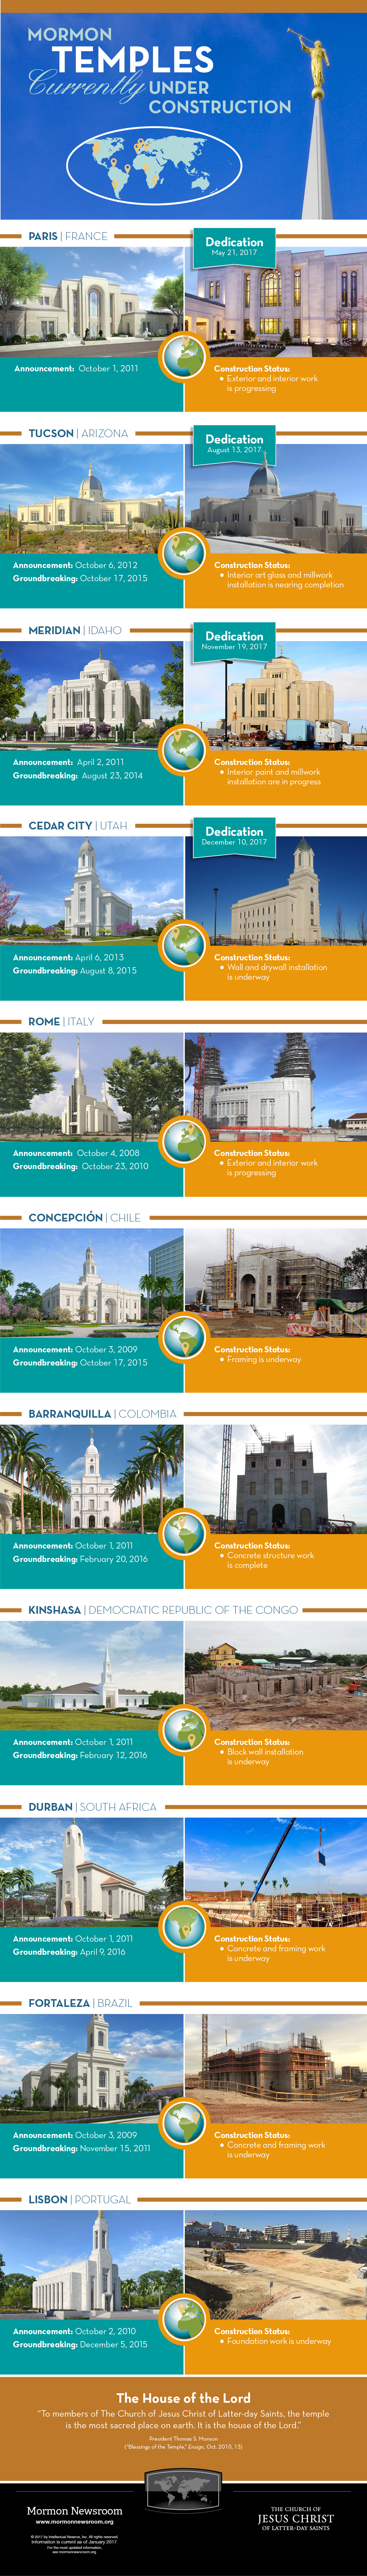 Temple-construction-infographic-february-2017.jpg